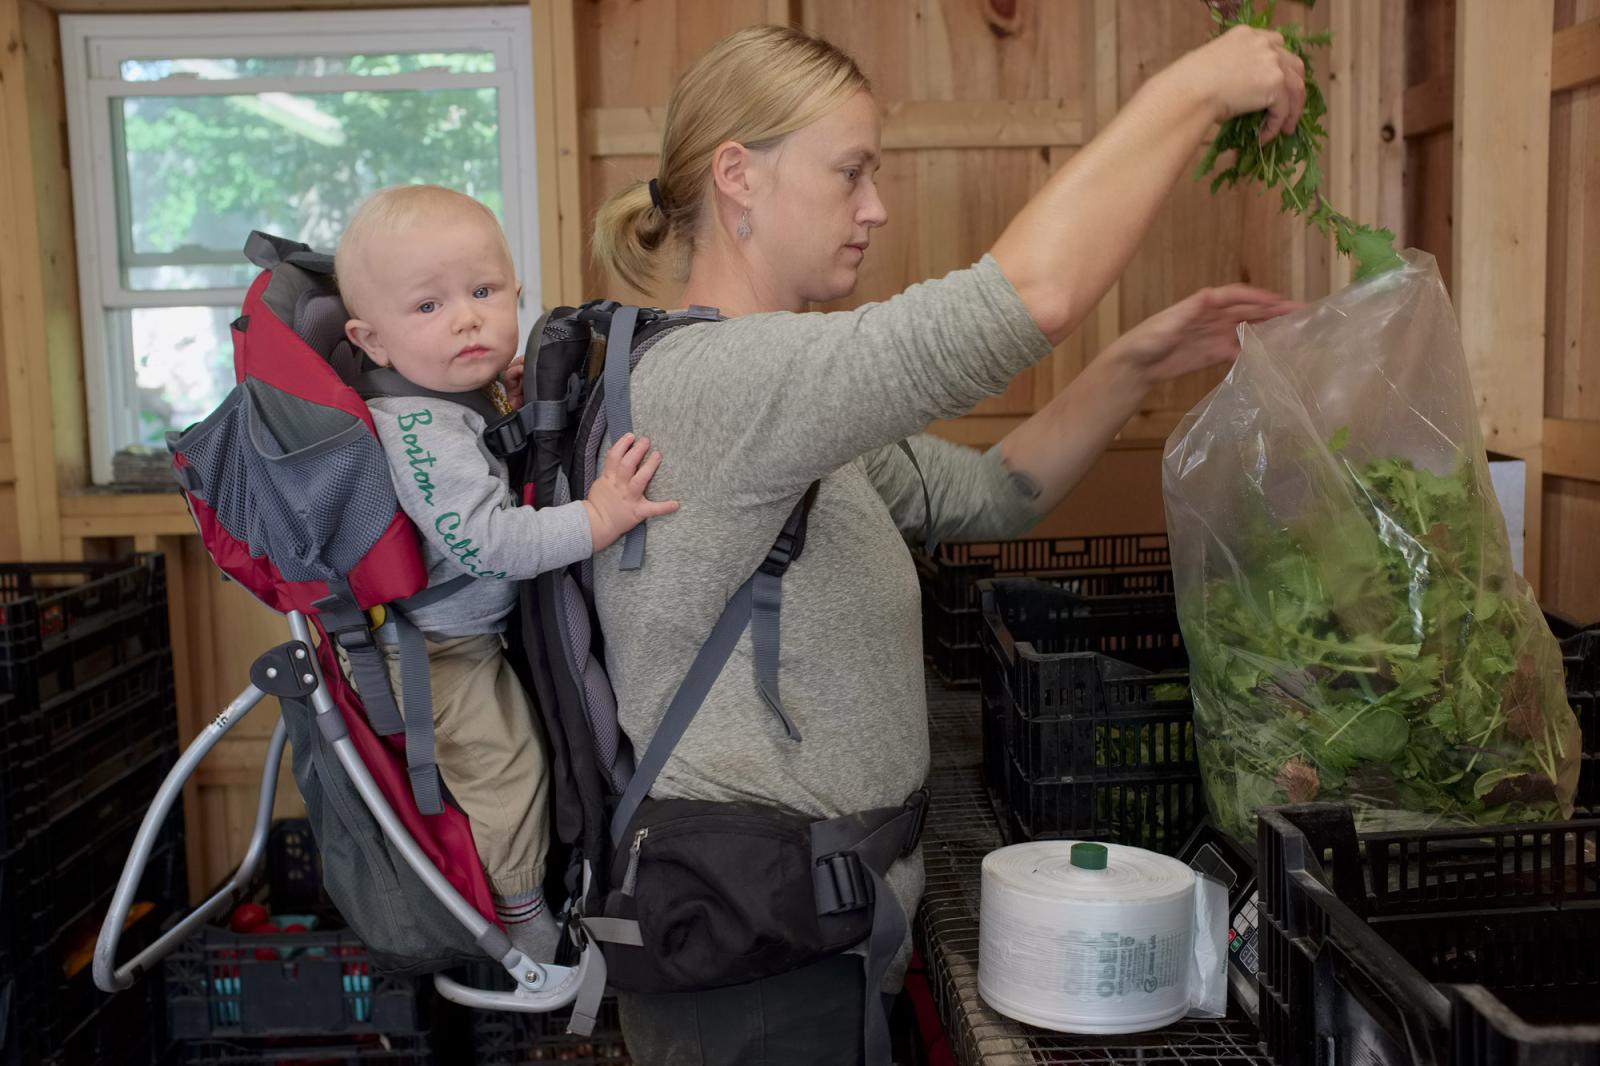 Farming for the Neighbors - Farmer Kirsten Anderson weighs and packs lettuce, while carrying her almost one year old son...